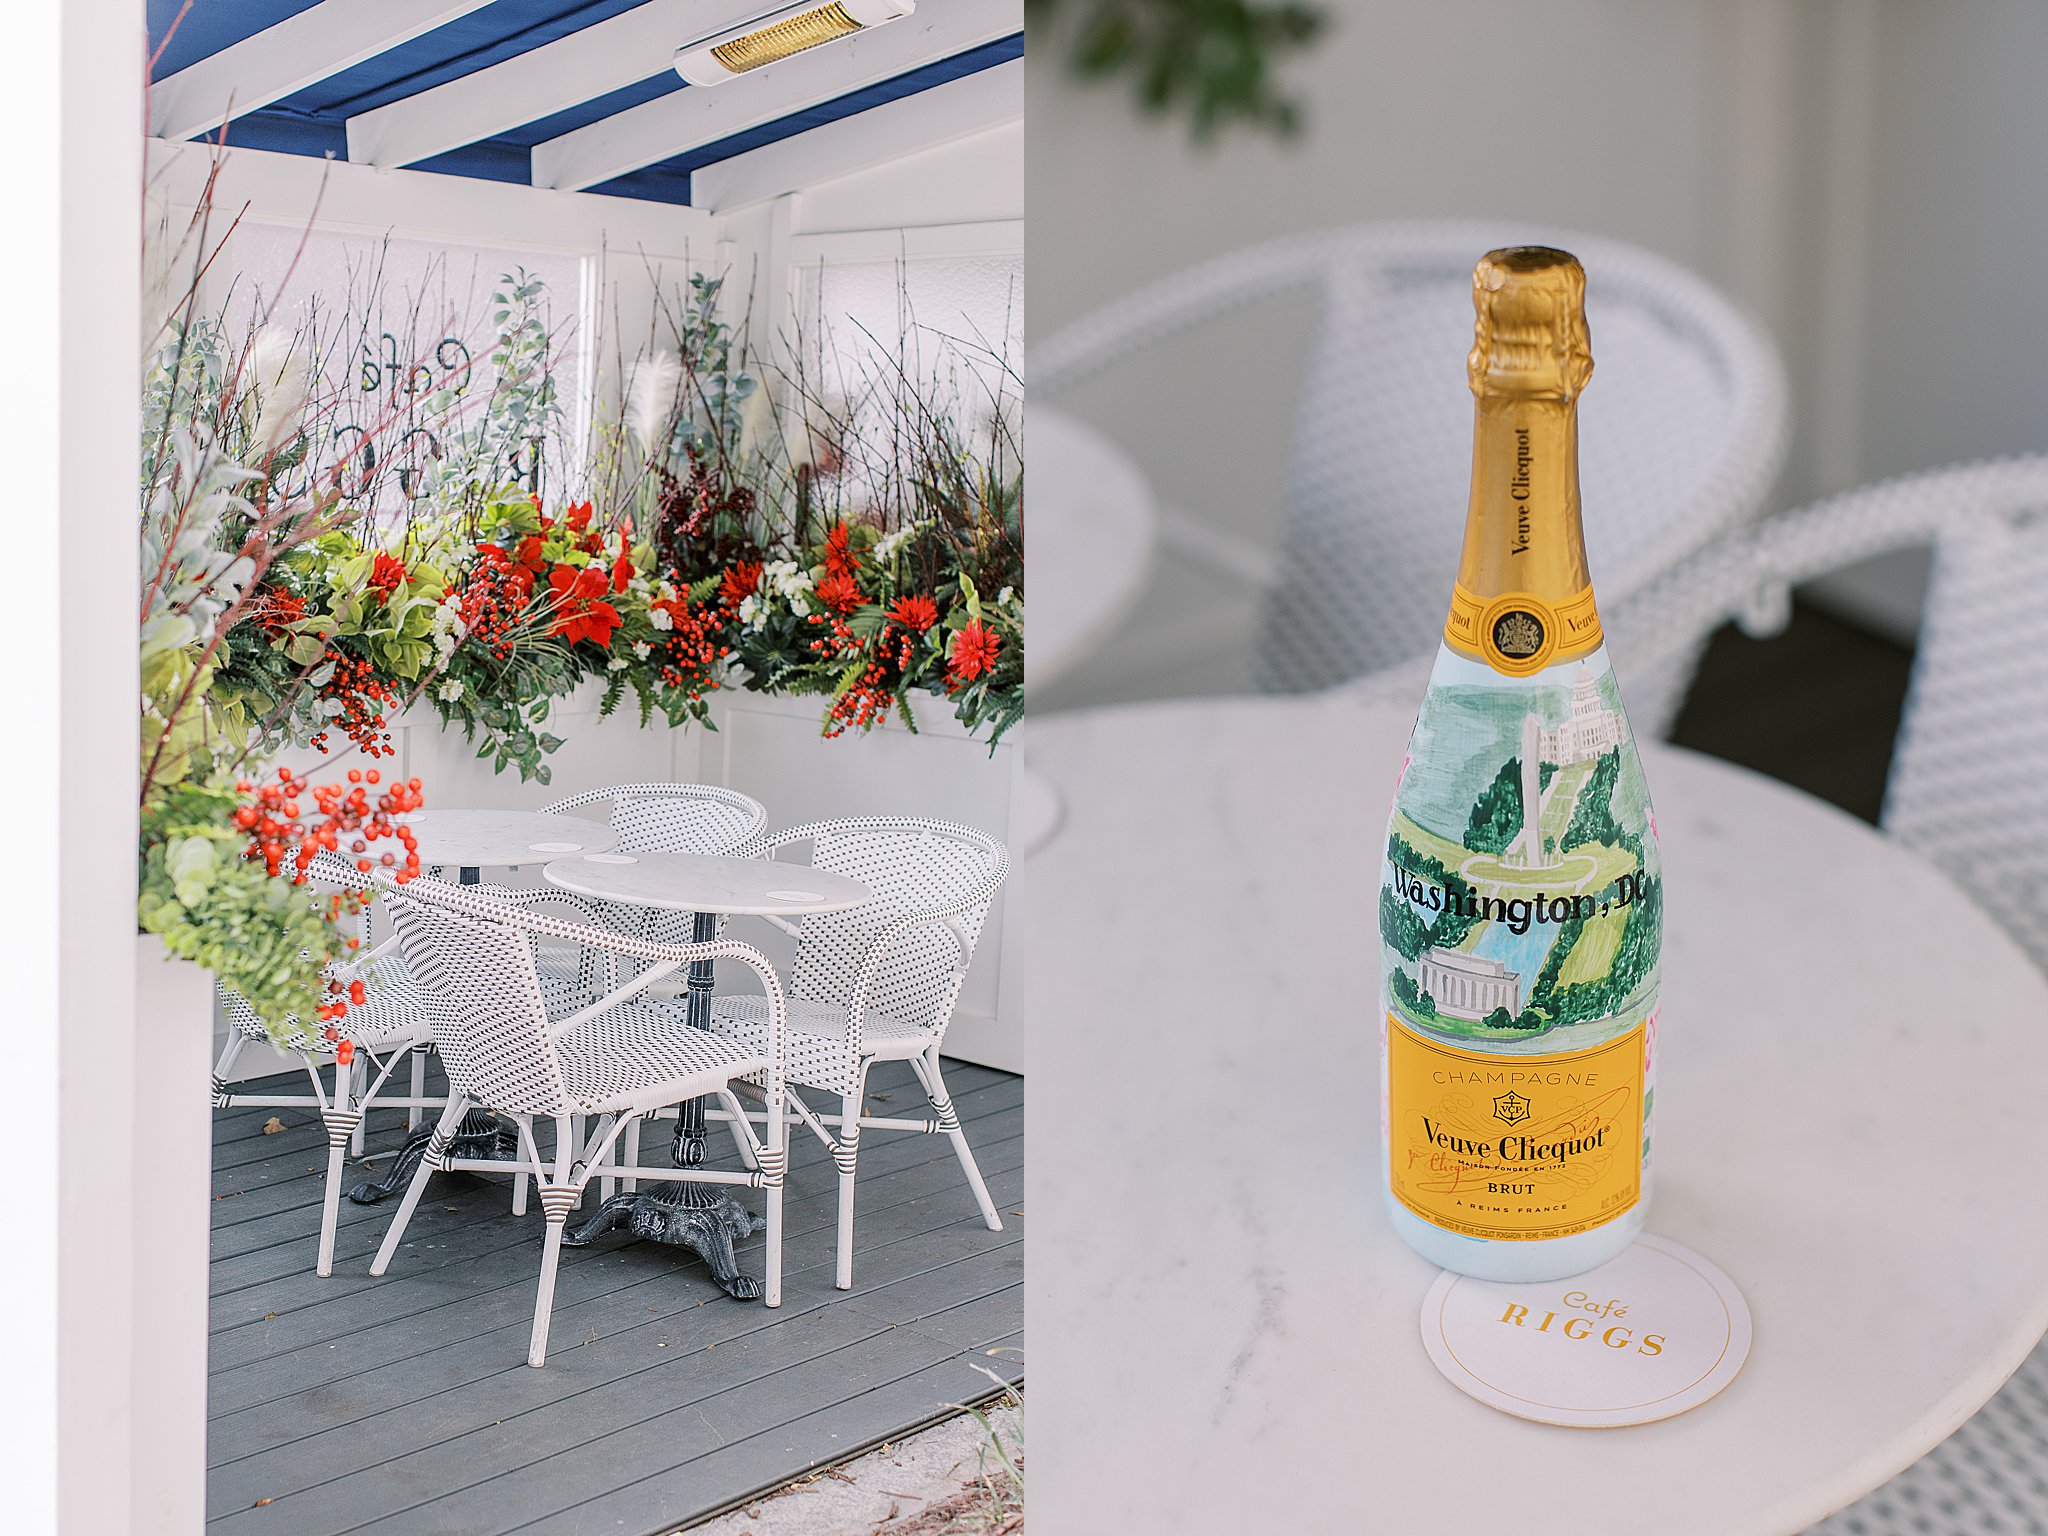 Riggs Cafe outdoor patio seating and custom painted Veuve Clicquot champagne bottle